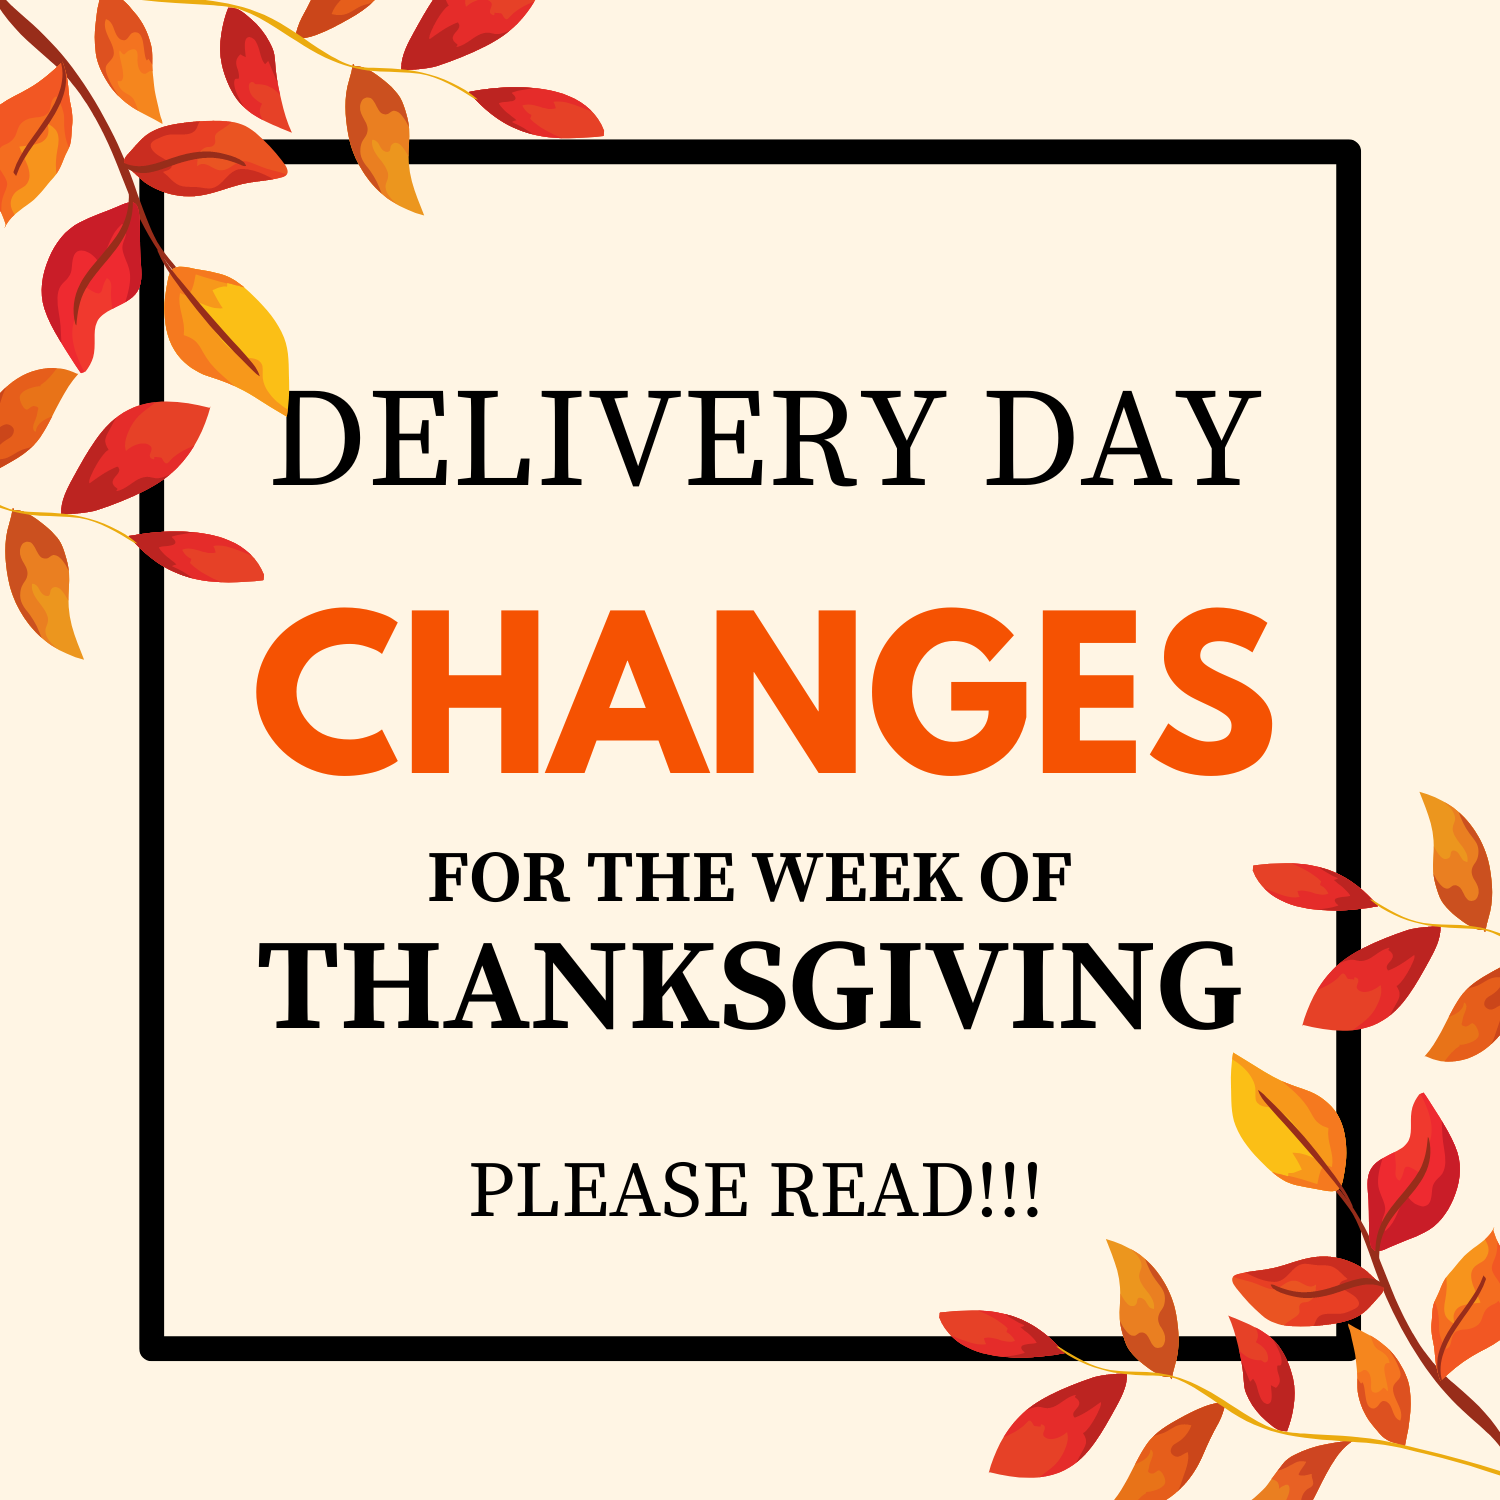 Previous Happening: ATTENTION: Delivery Day Changes for Week of Thanksgiving